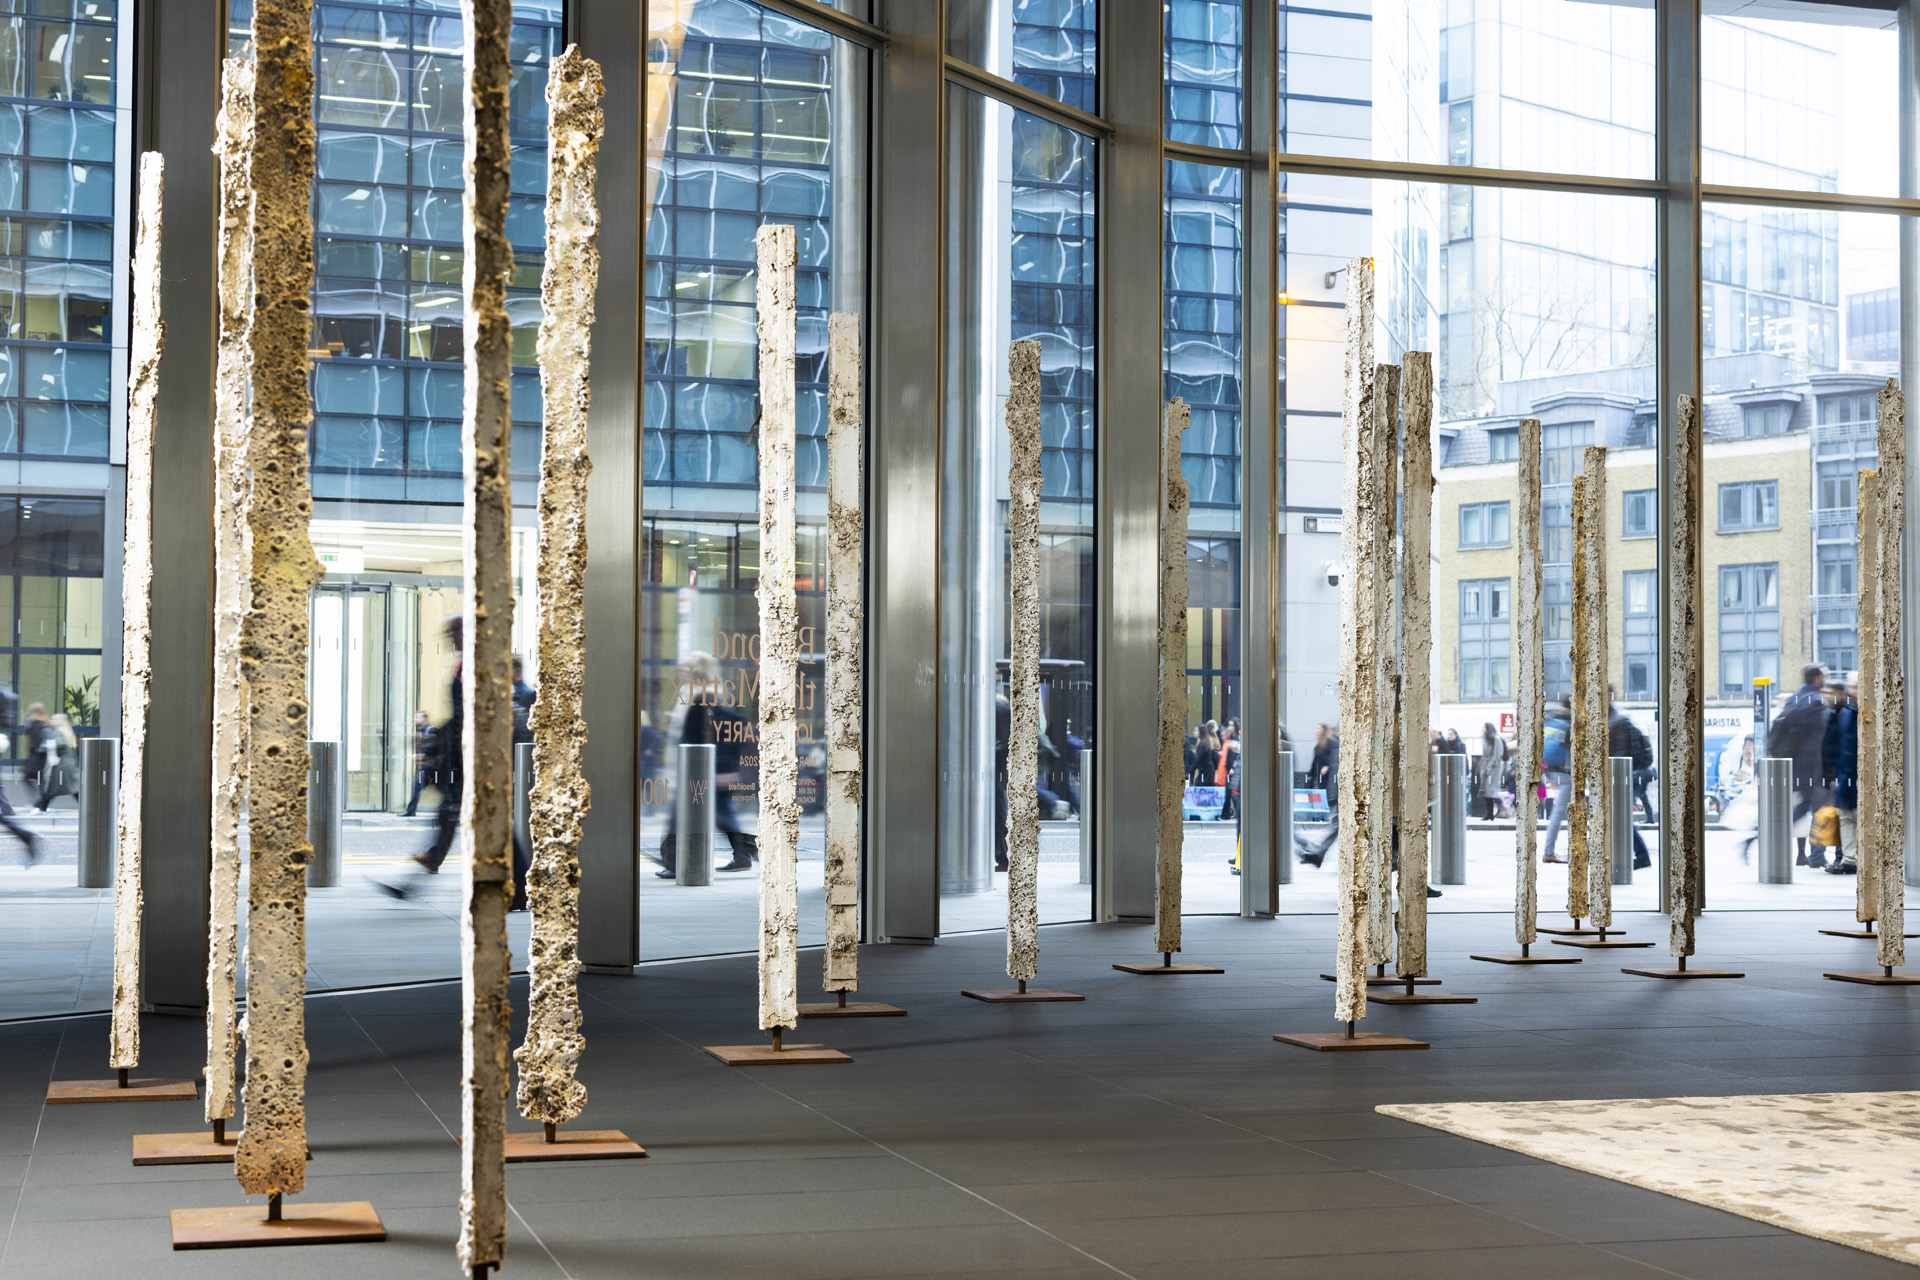 Artist Jodie Carey's work on display at ‘Beyond the Matrix’, an installation put on by Brookfield Properties of two female-led sculpture exhibitions in partnership with The Association of Women in the Arts (AWITA) Members opens at 100 Bishopsgate, London, ahead of International Women’s Day